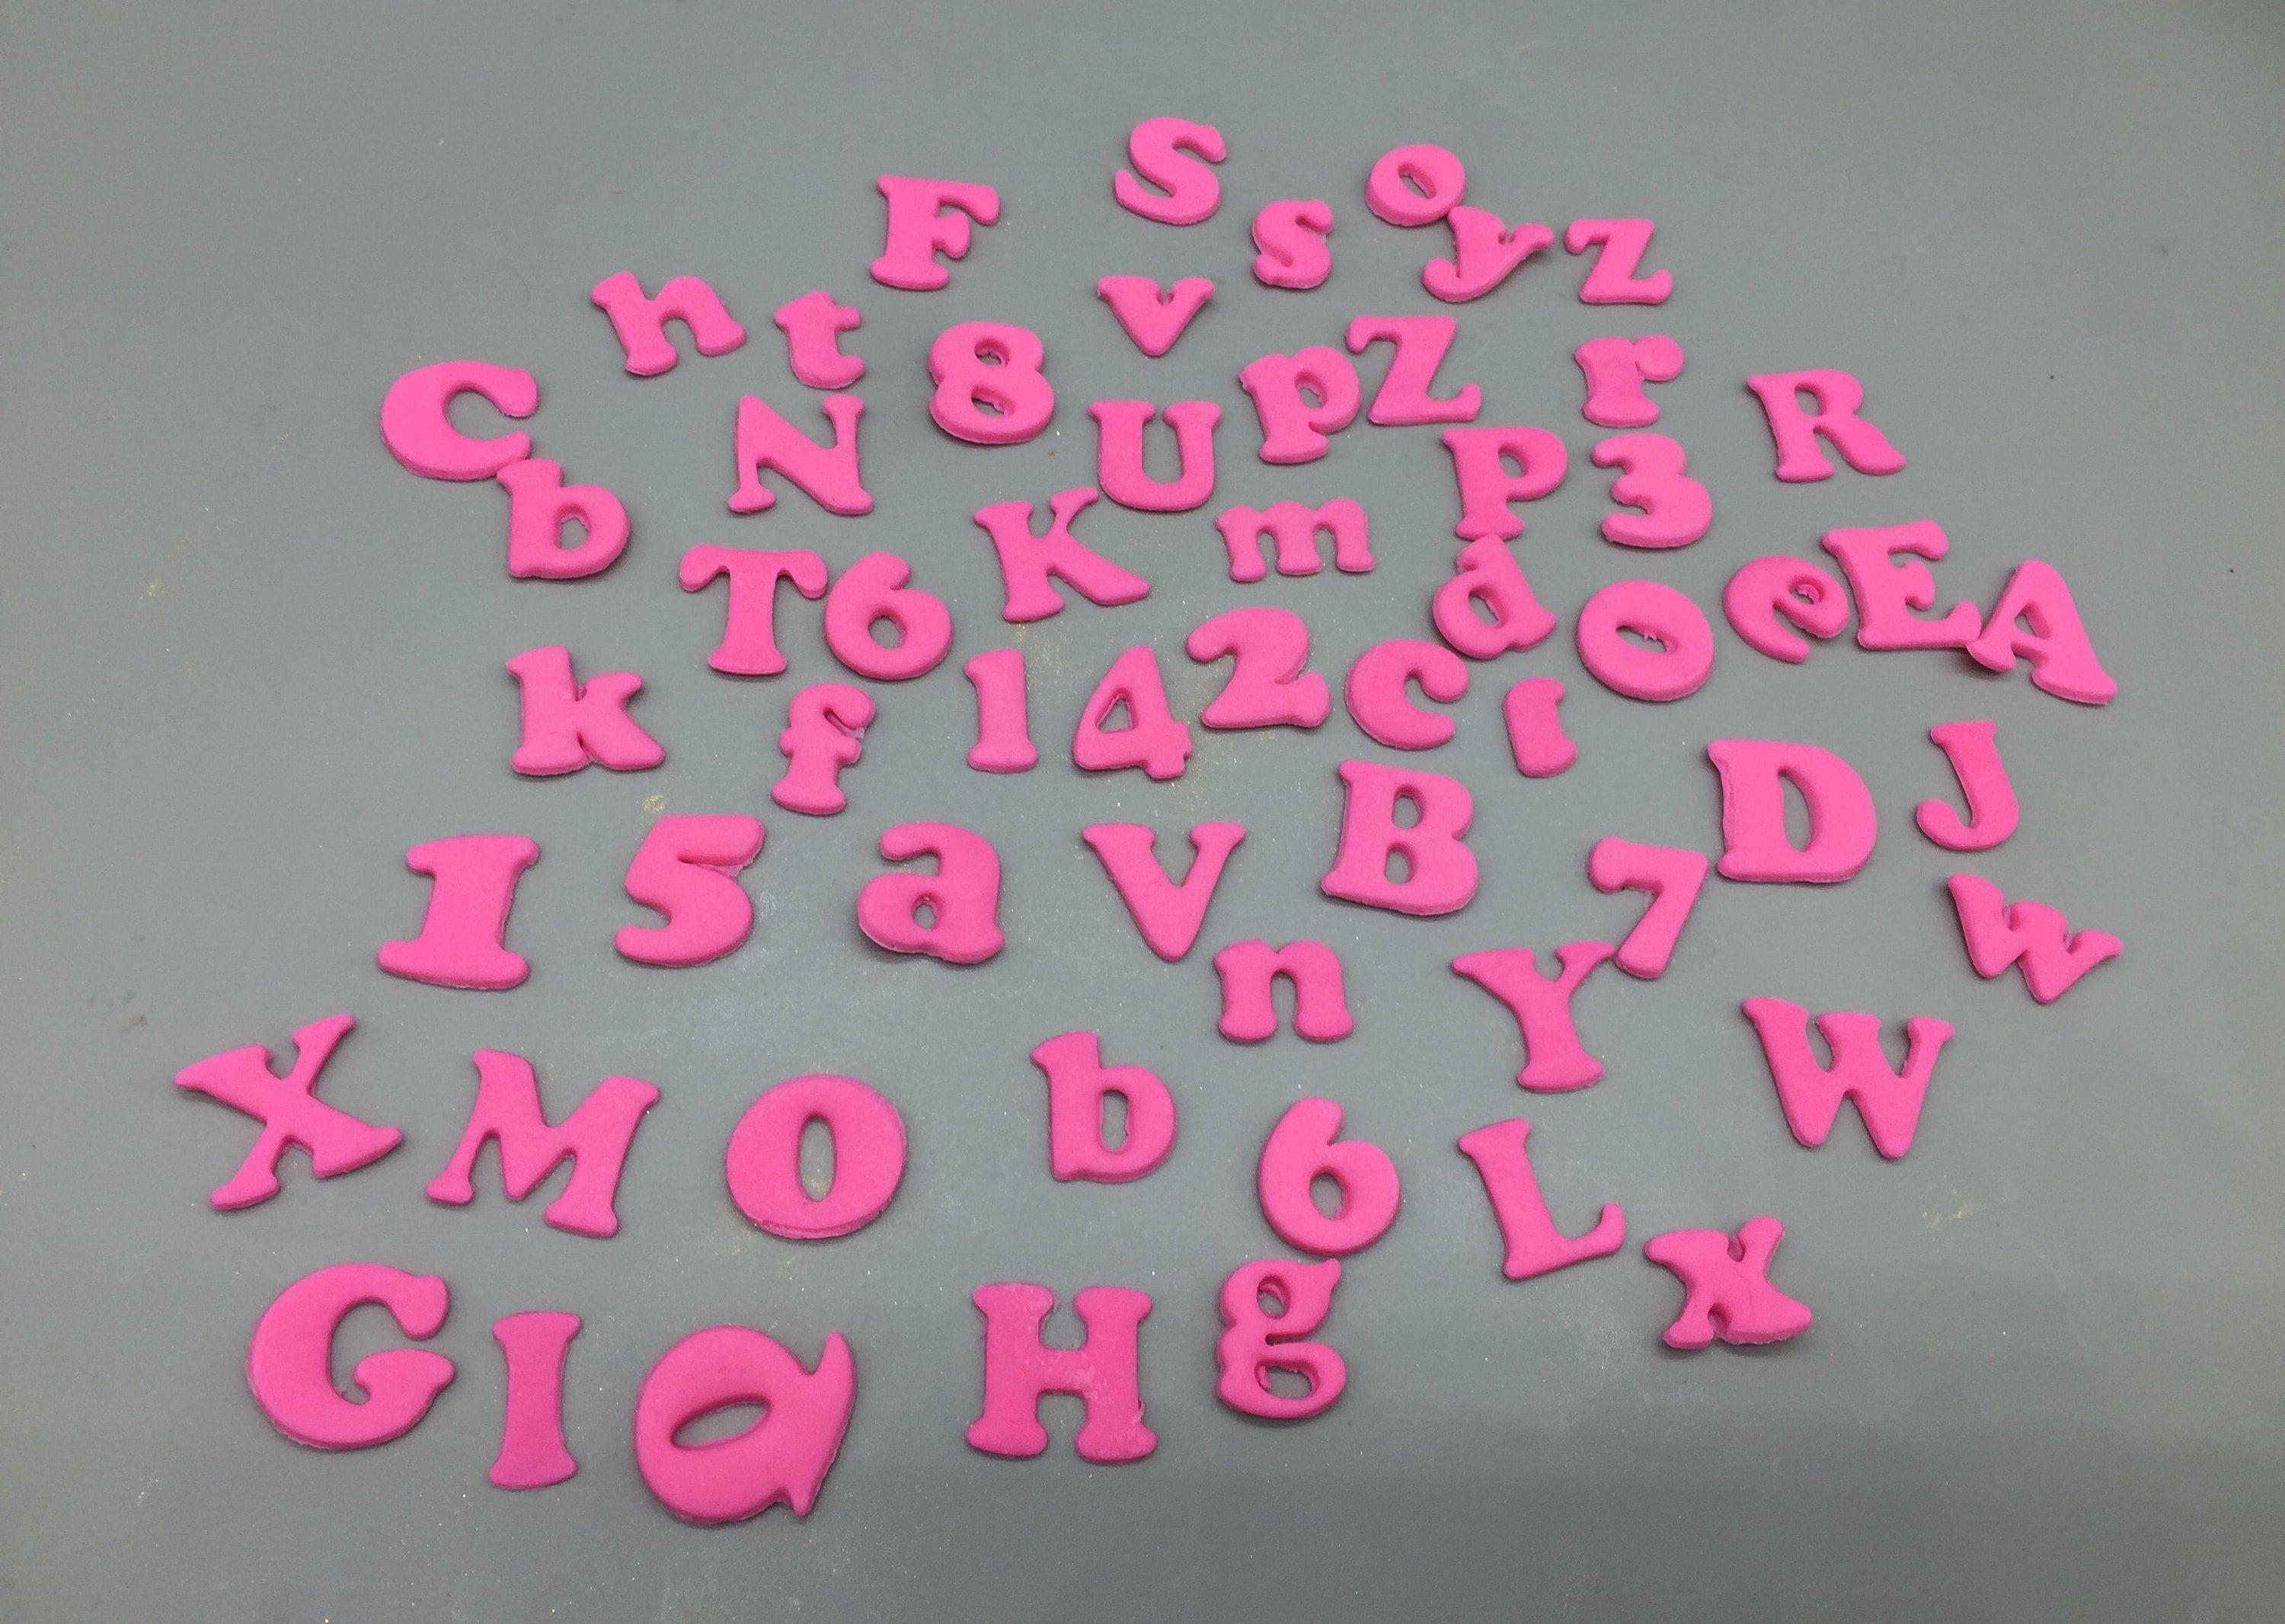 Sugar Letters, Alphabet, Letters for cakes and cupcakes, Fondant letters,  Cake decoration,Edible fondant letter decorations #1